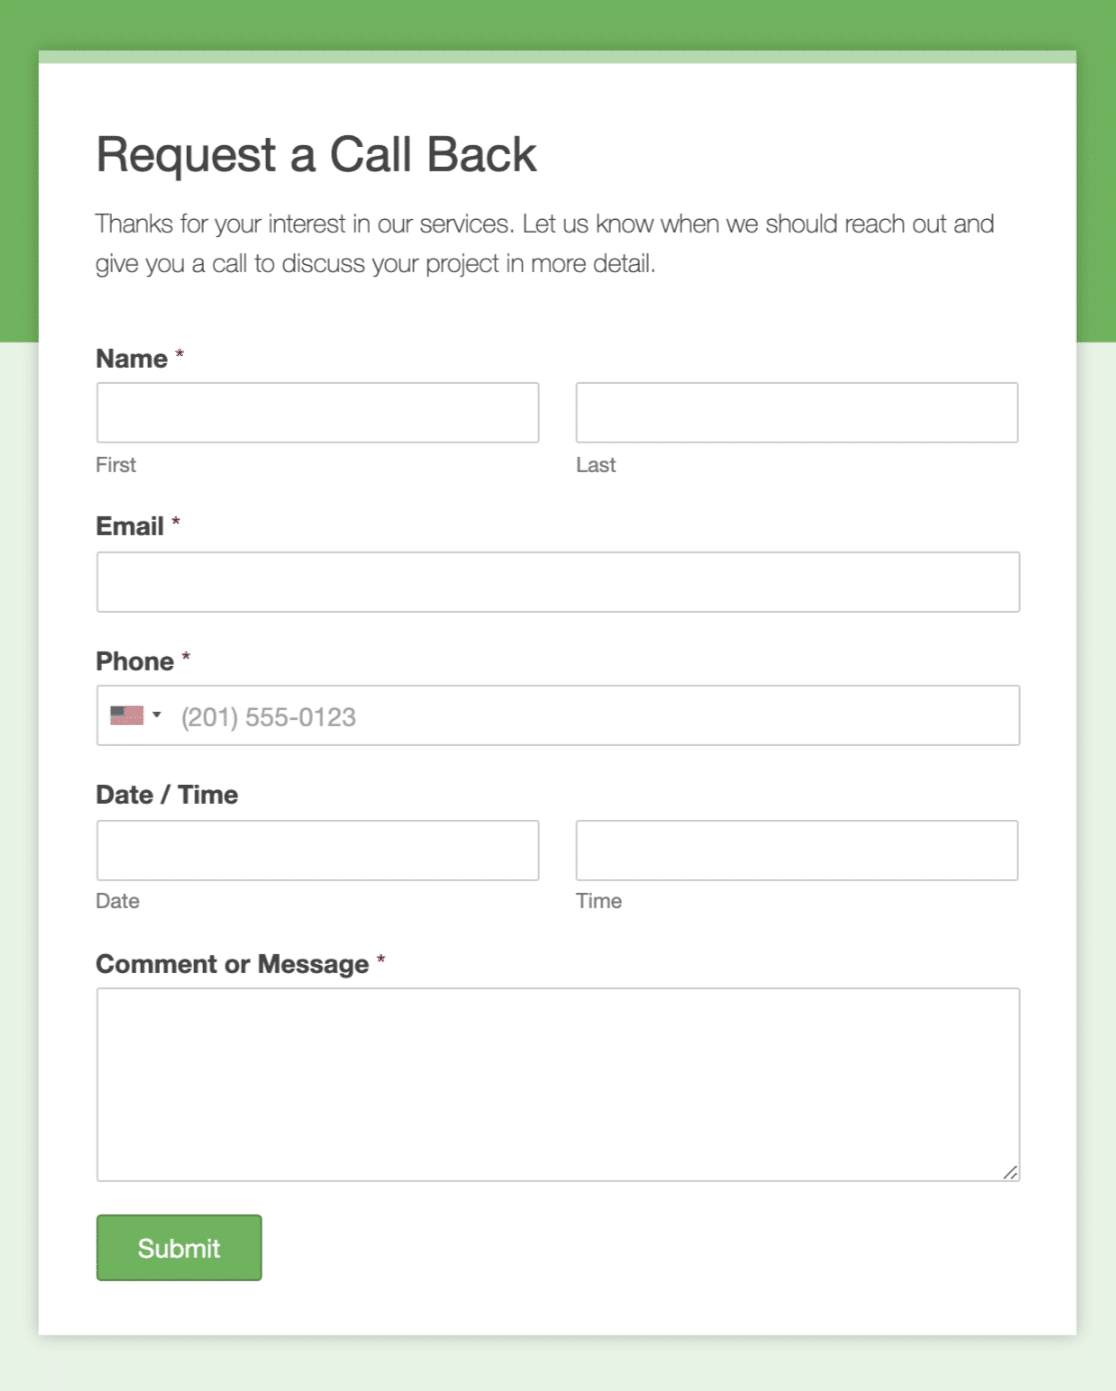 A Request a Call Back form landing page